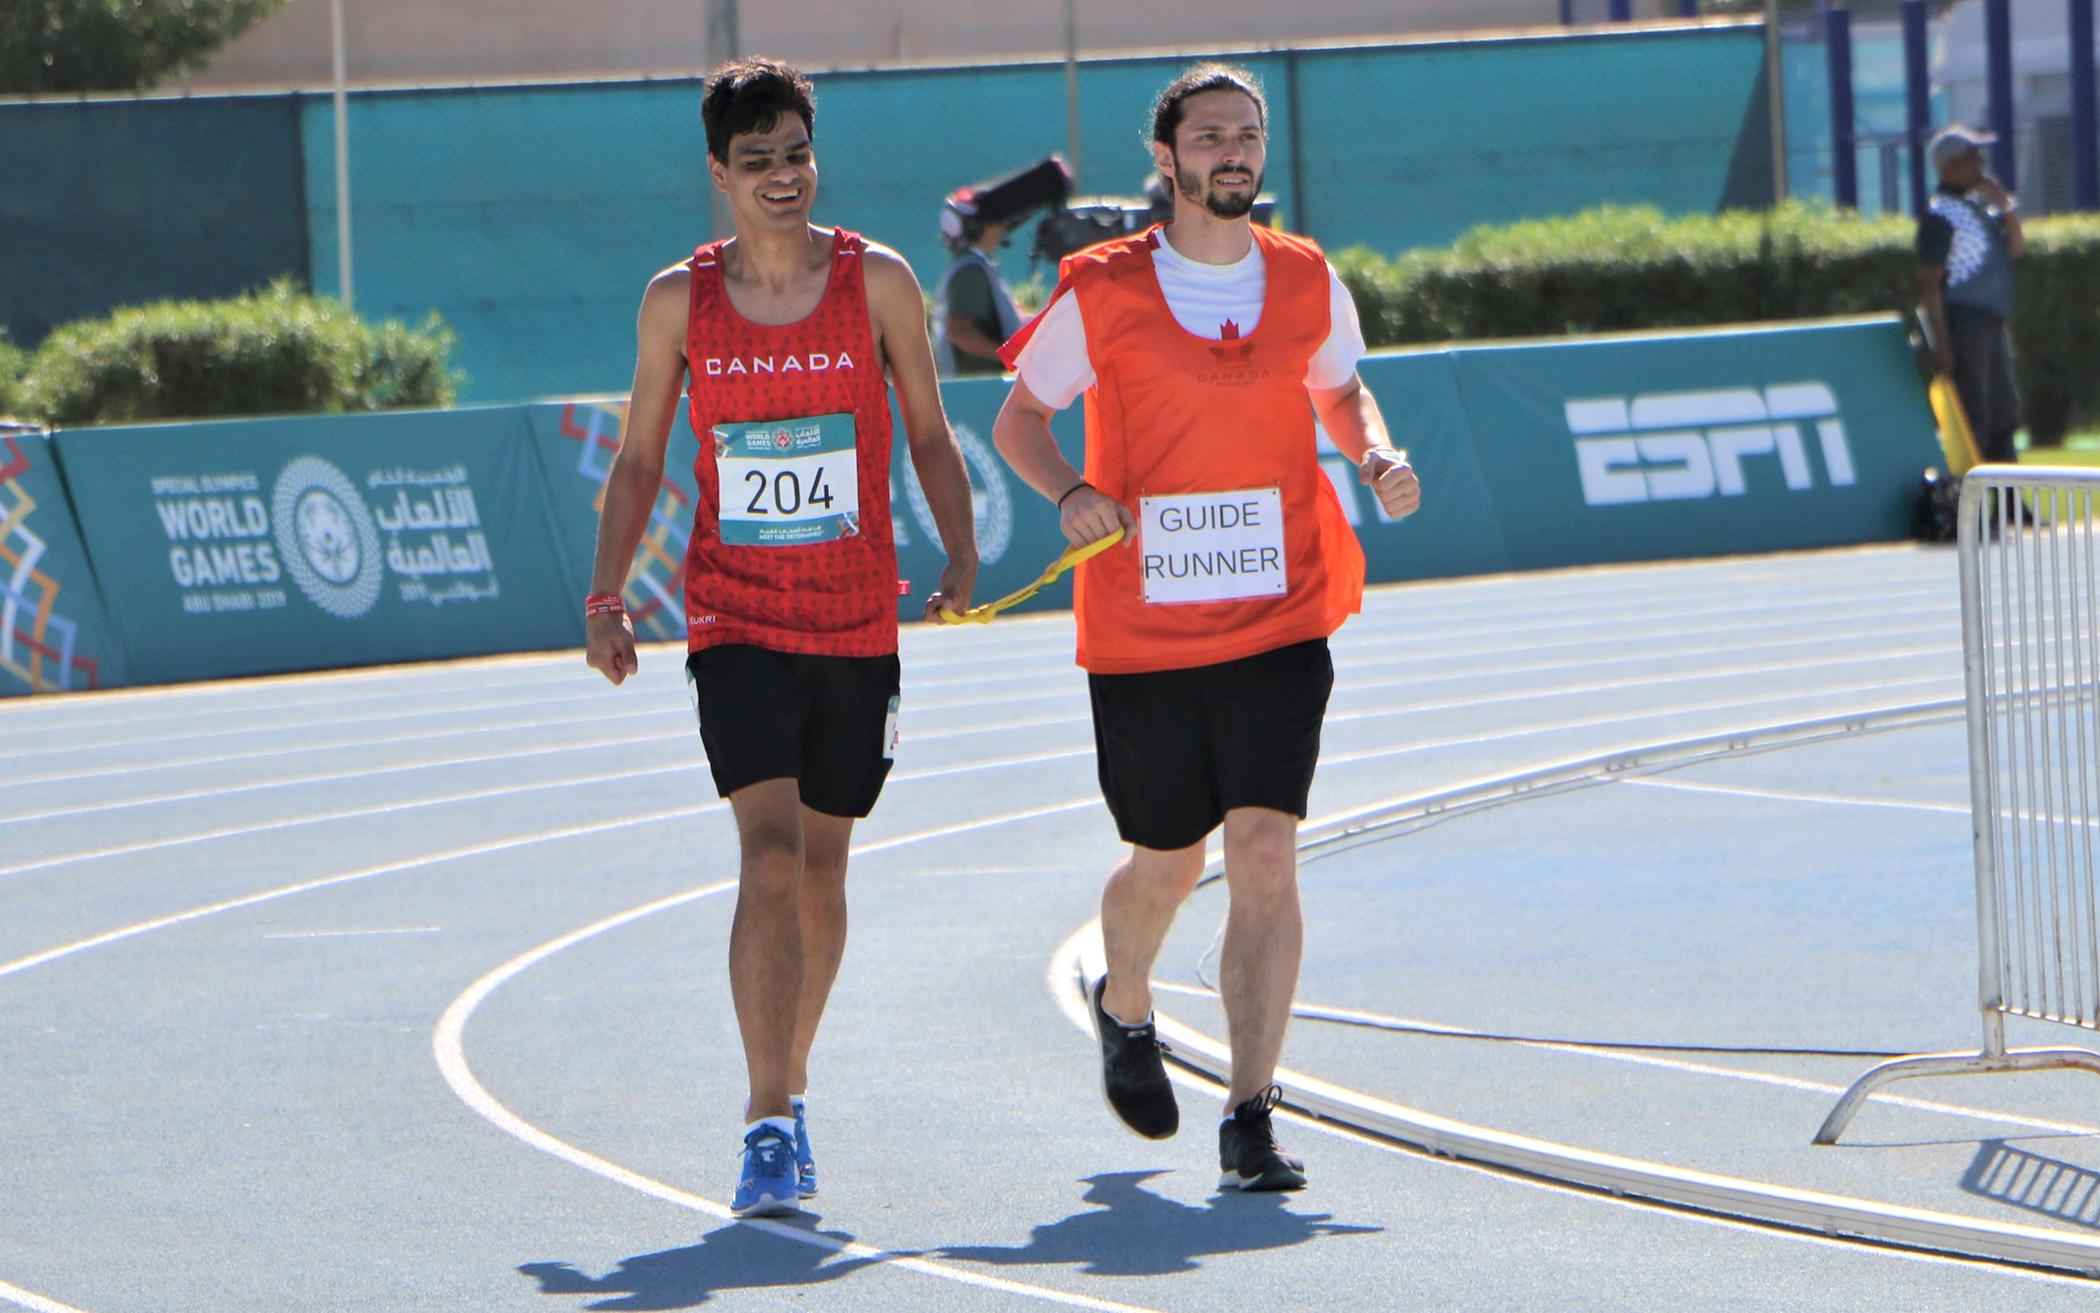 CRC Member Wins Bronze at Special Olympics World Games